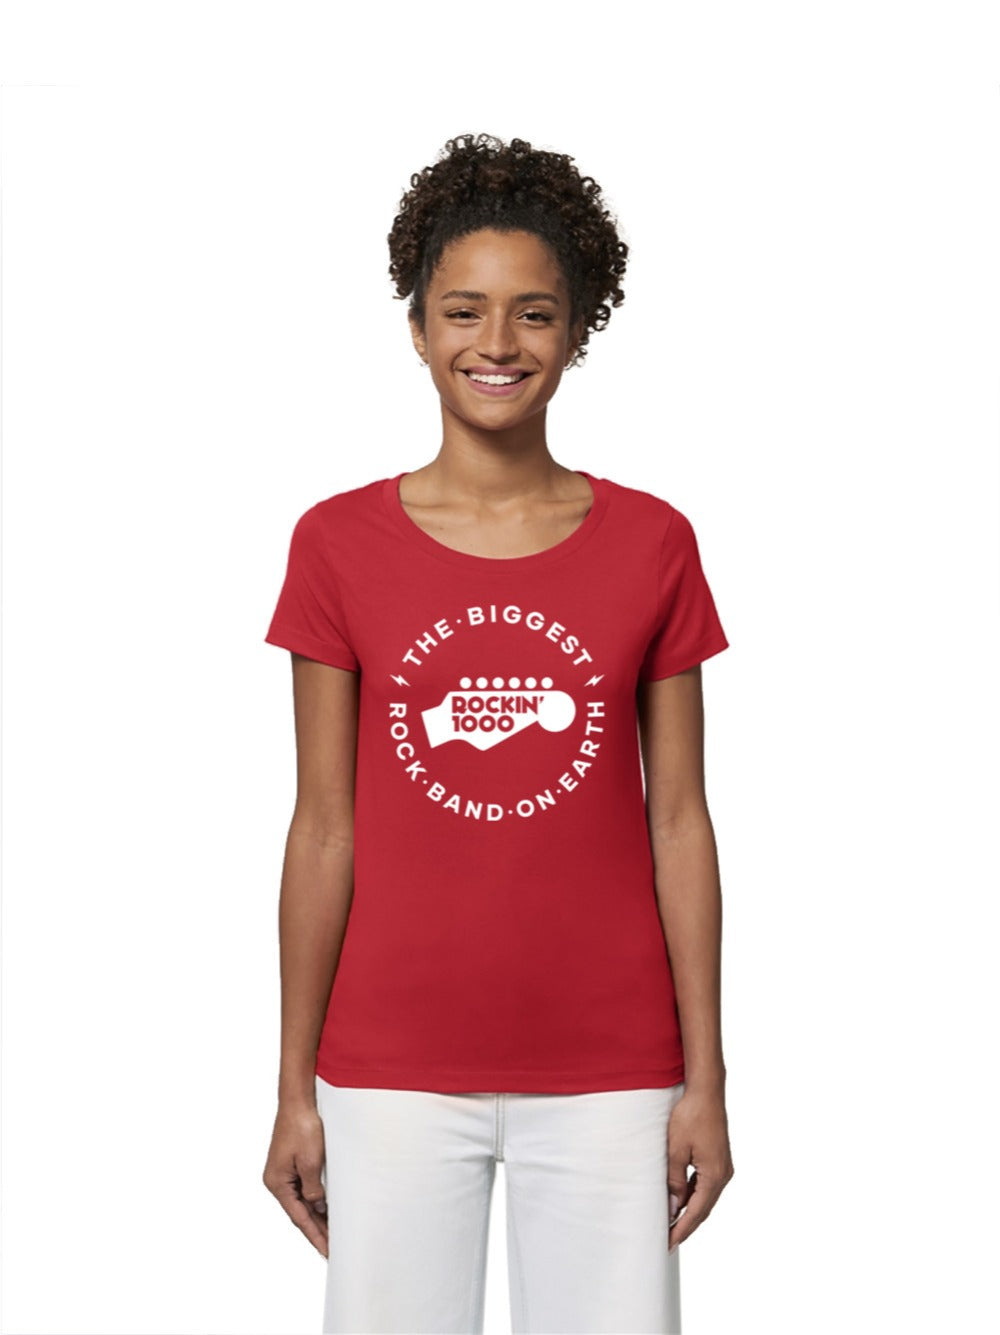 Biggest Rock Band On Earth Red T-Shirt Woman